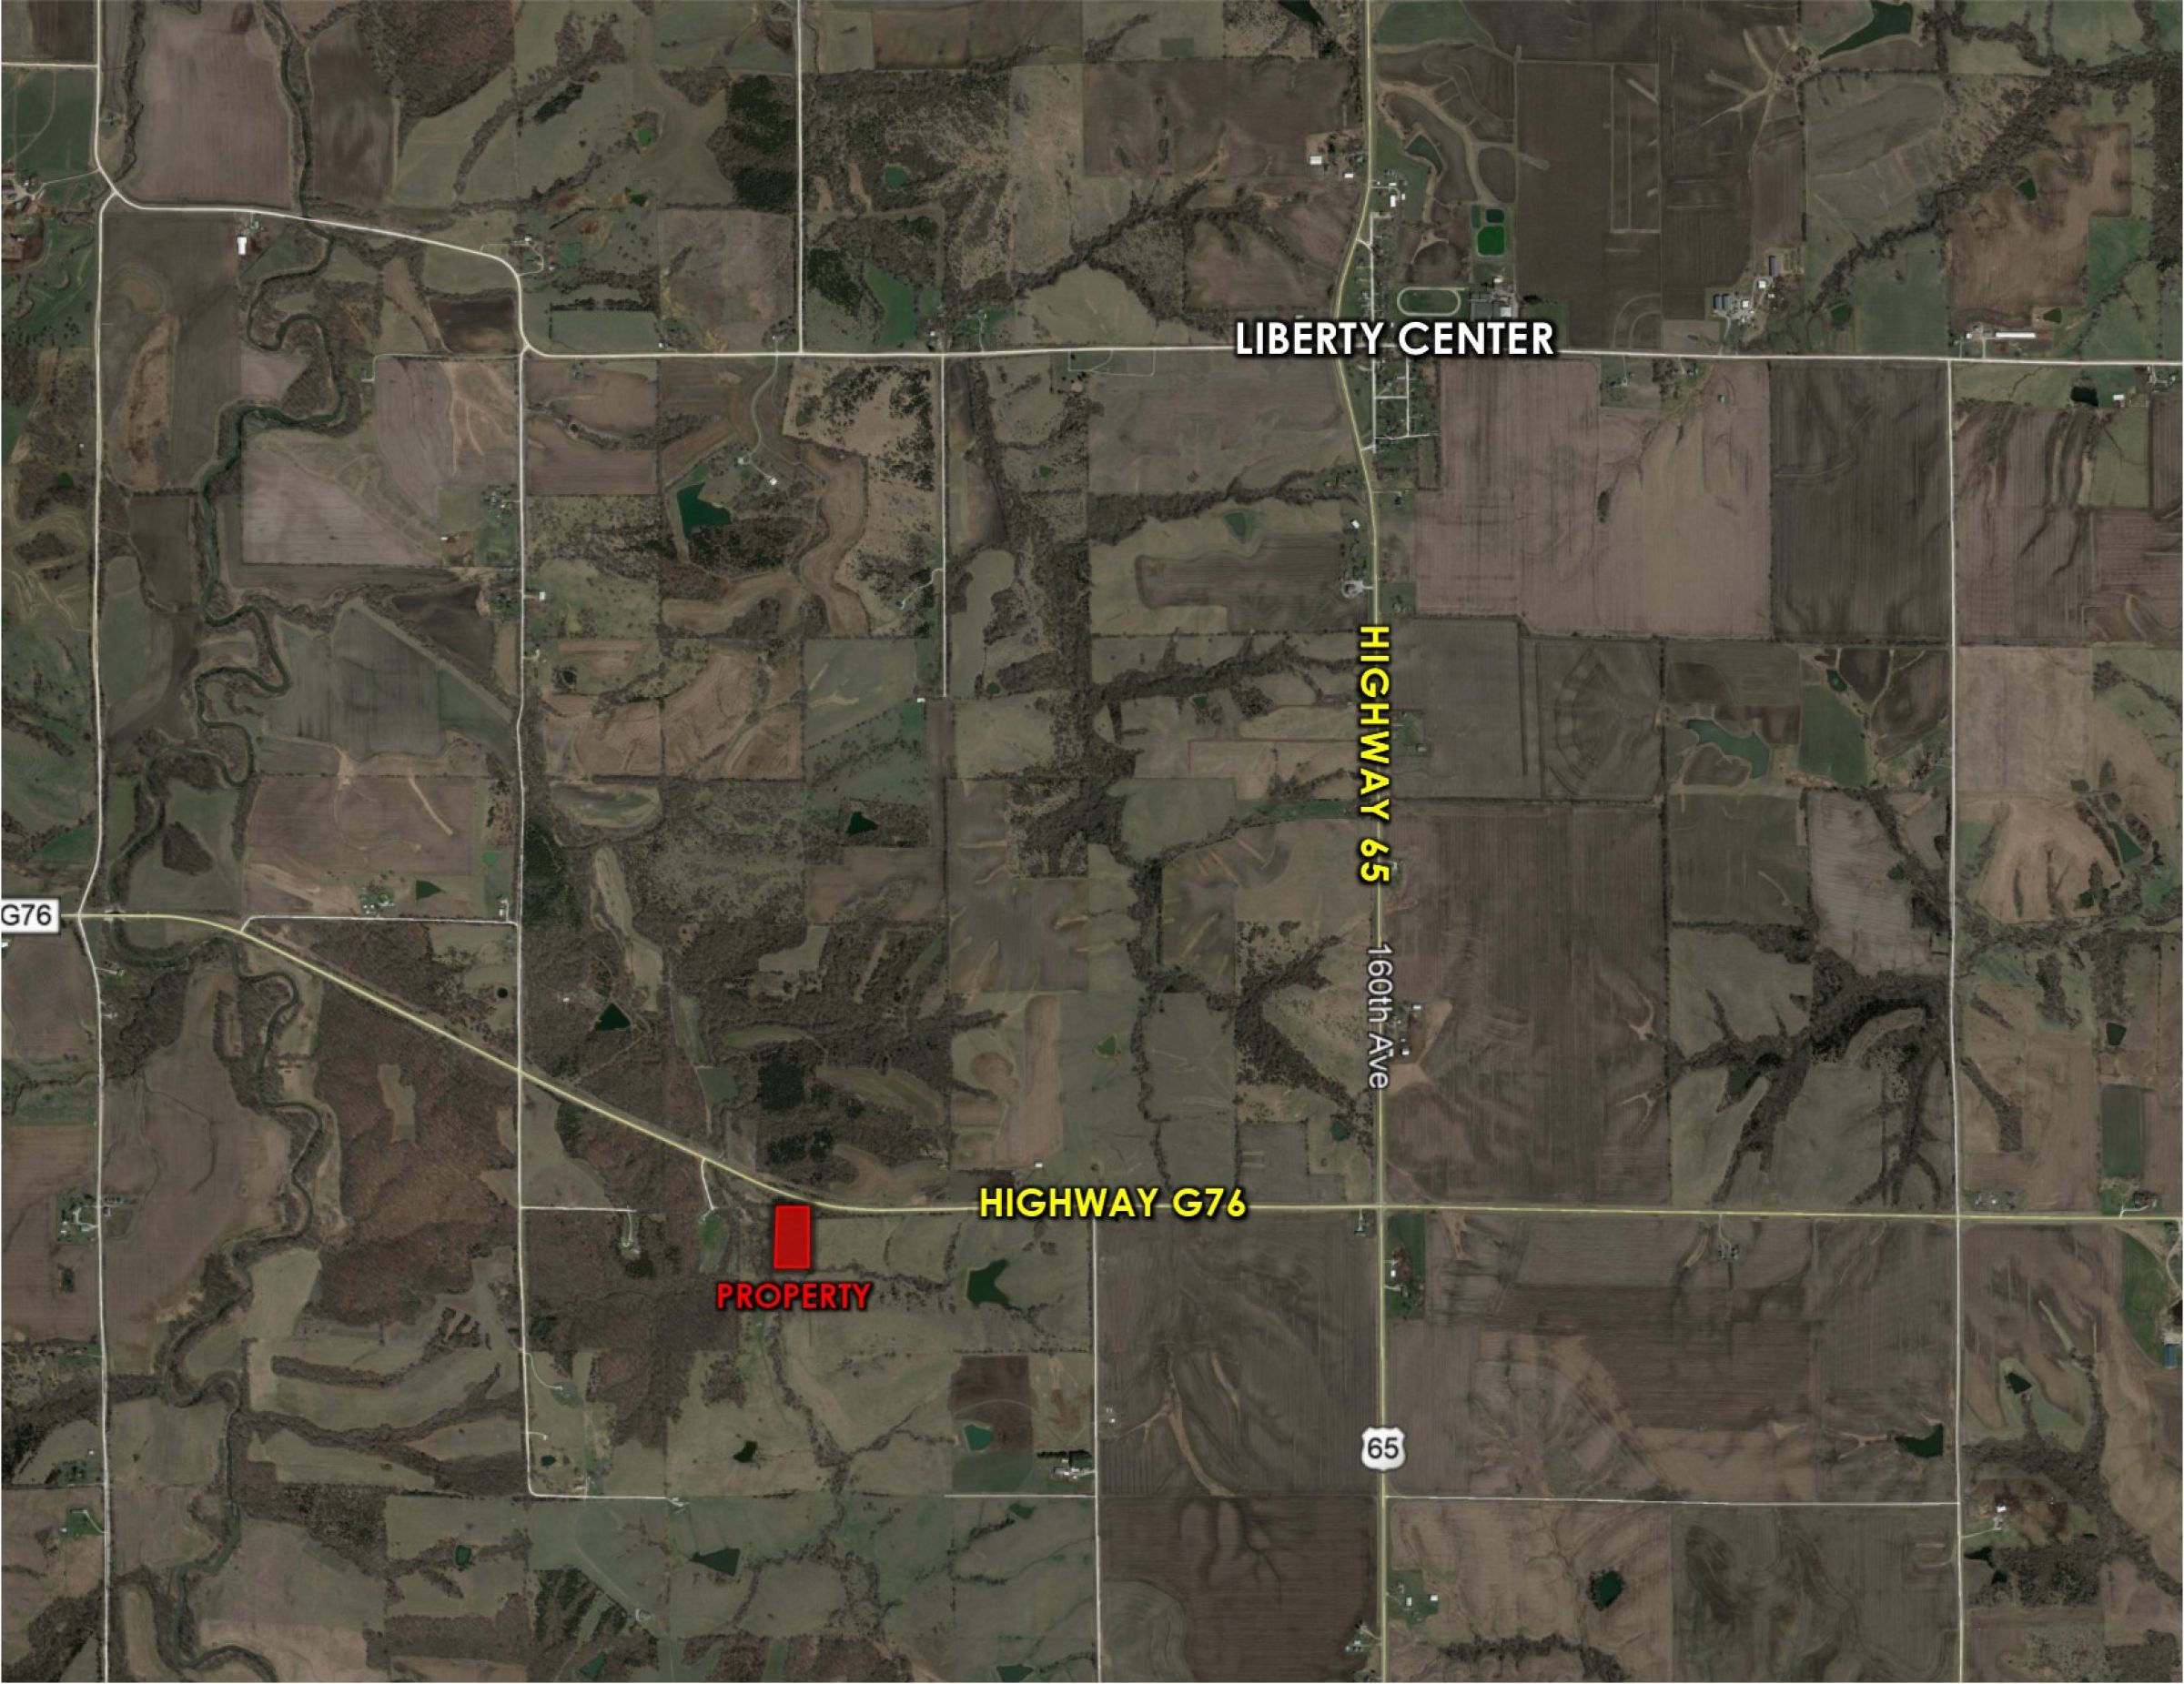 Peoples Company Acreage for Sale - #14547-15002-g76-highway-lacona-50139